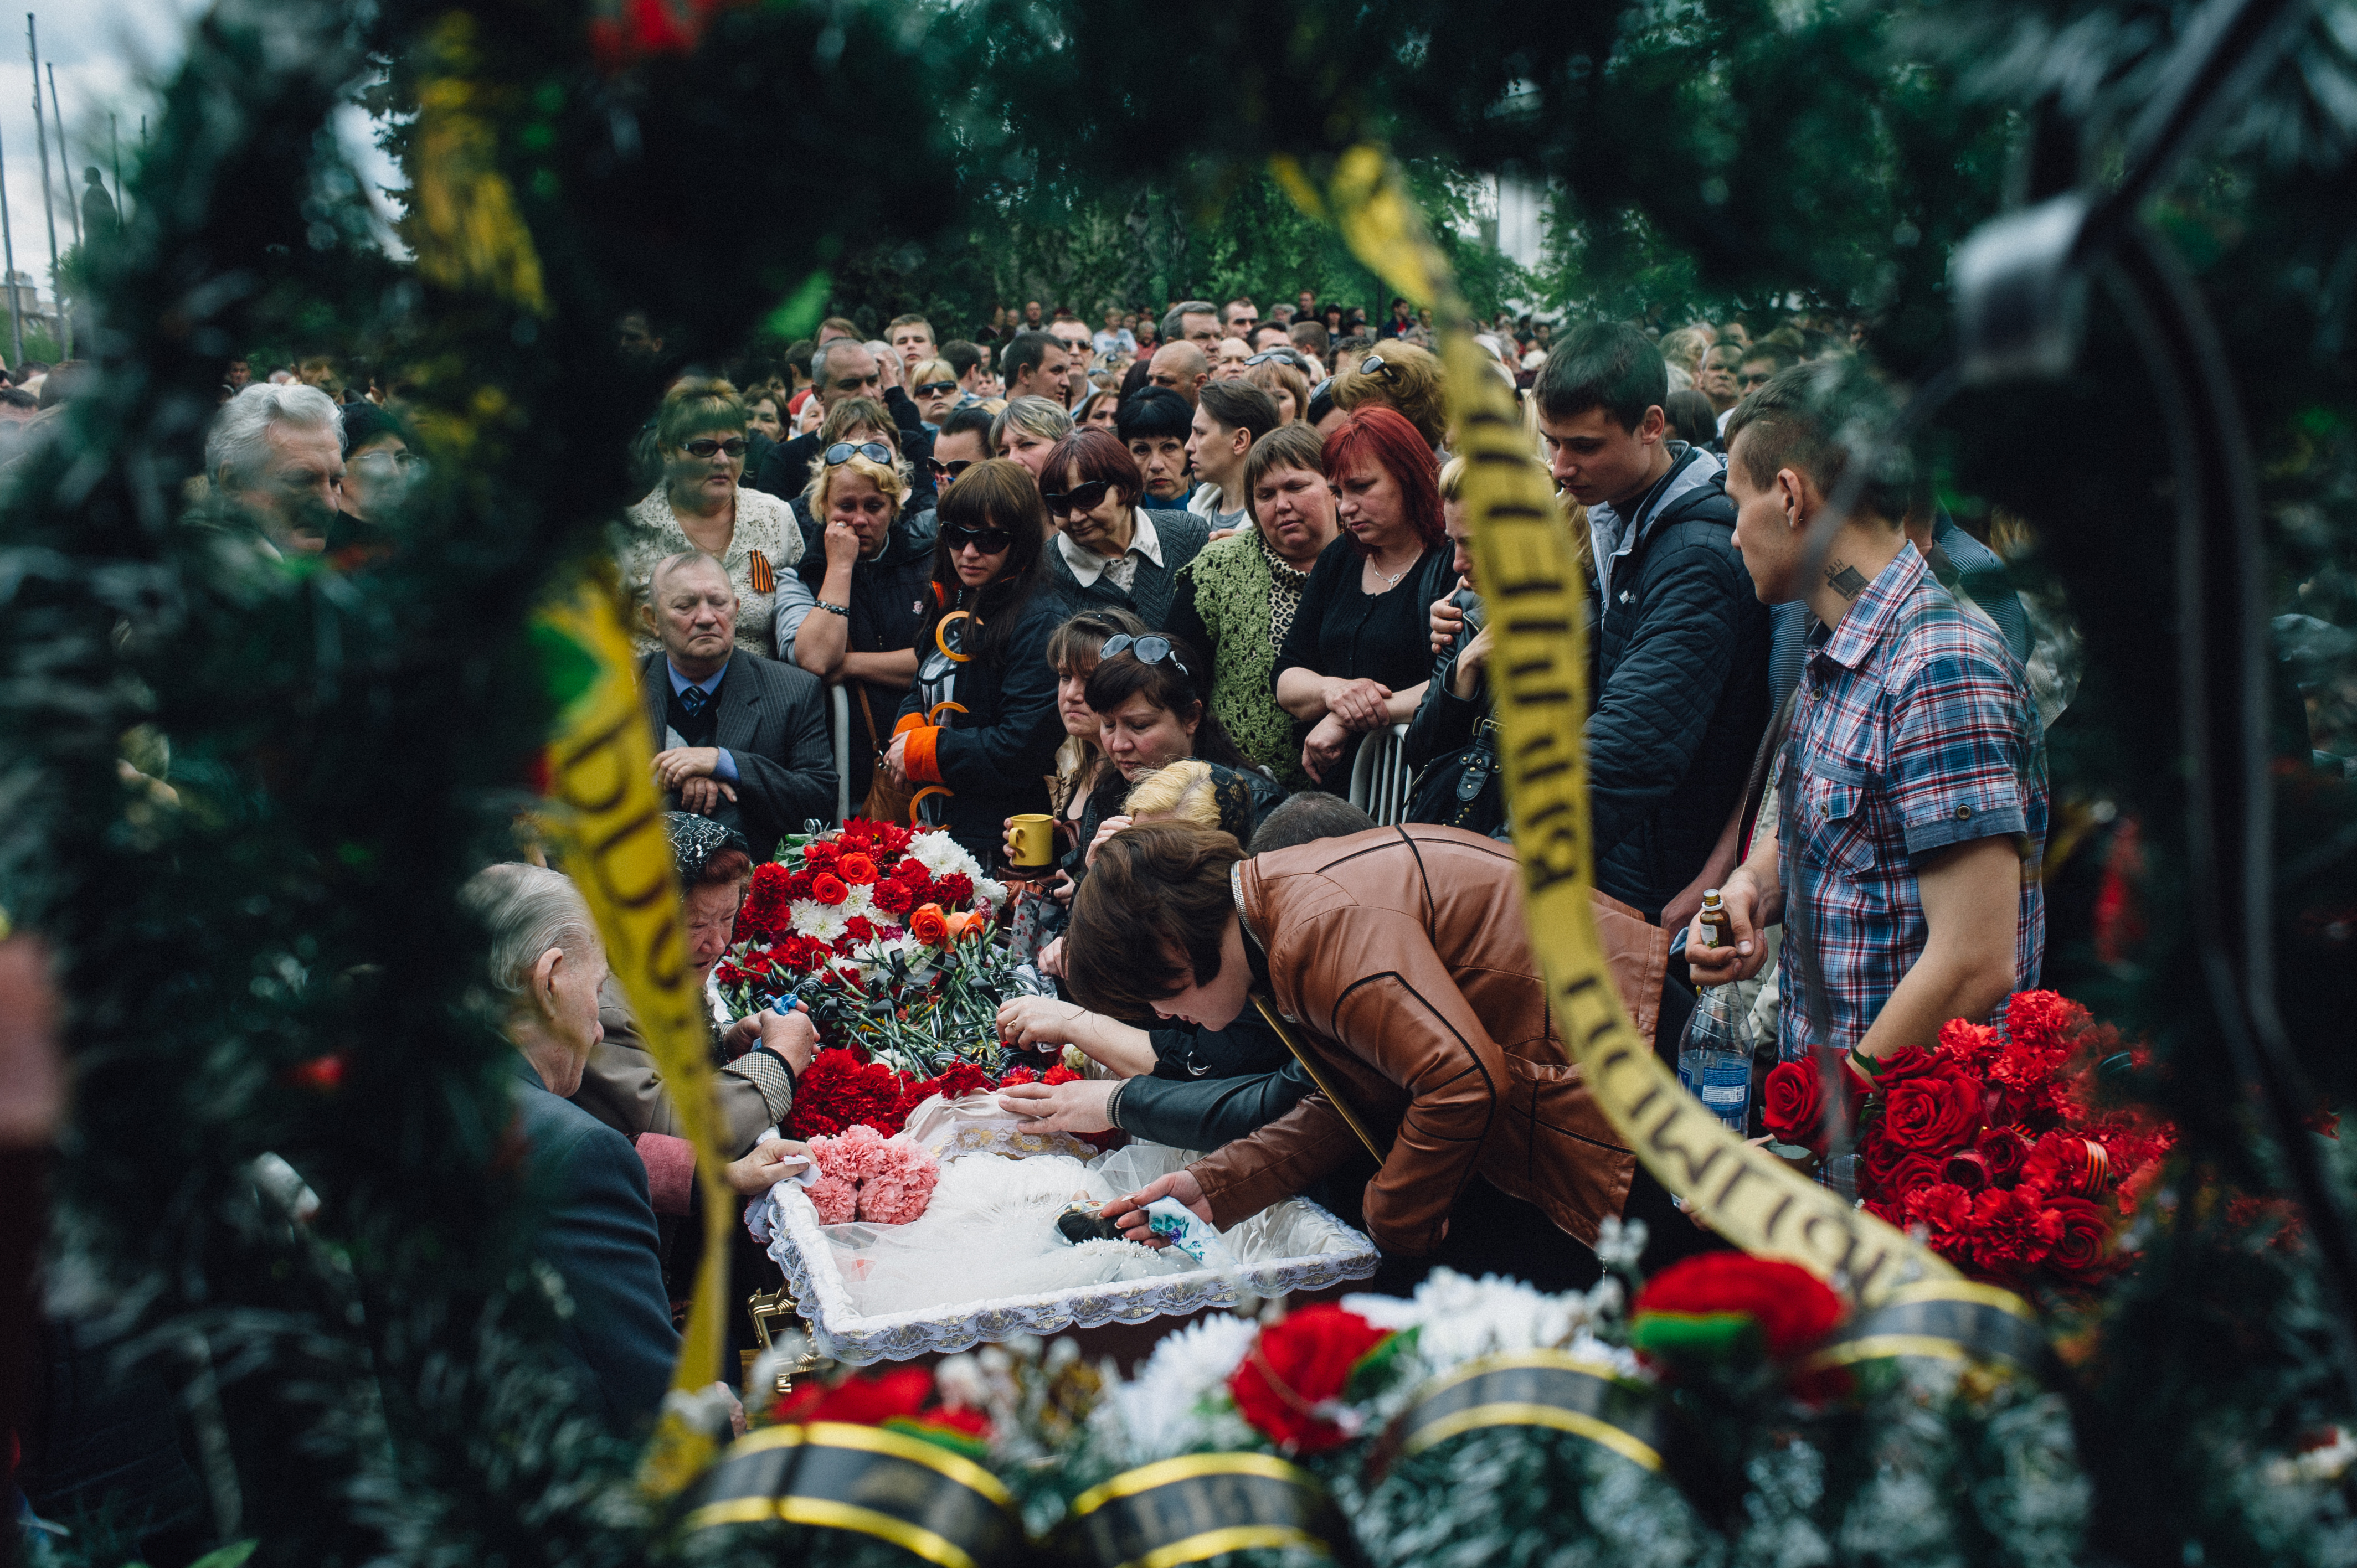 Parents and relatives mourn a pro-Russian medical worker, in Kramatorsk, Ukraine, on May 5, 2014 (Maxim Dondyuk for TIME)